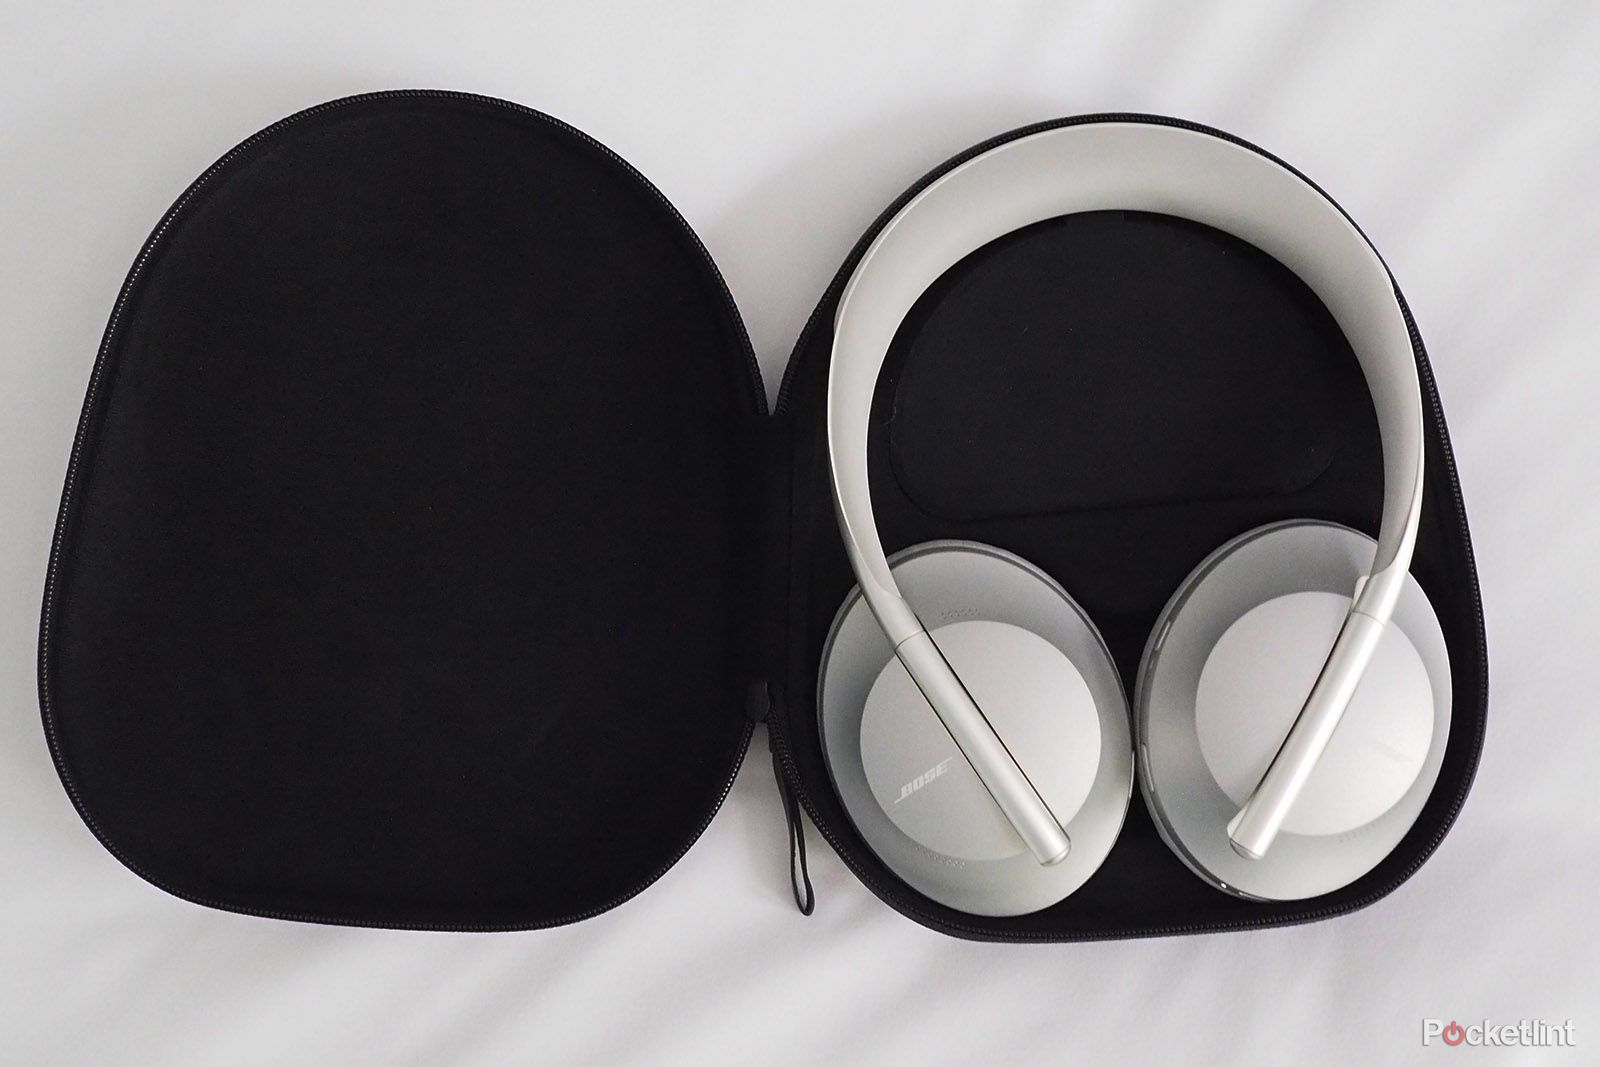 Bose NC Headphones 700 review: The best is back